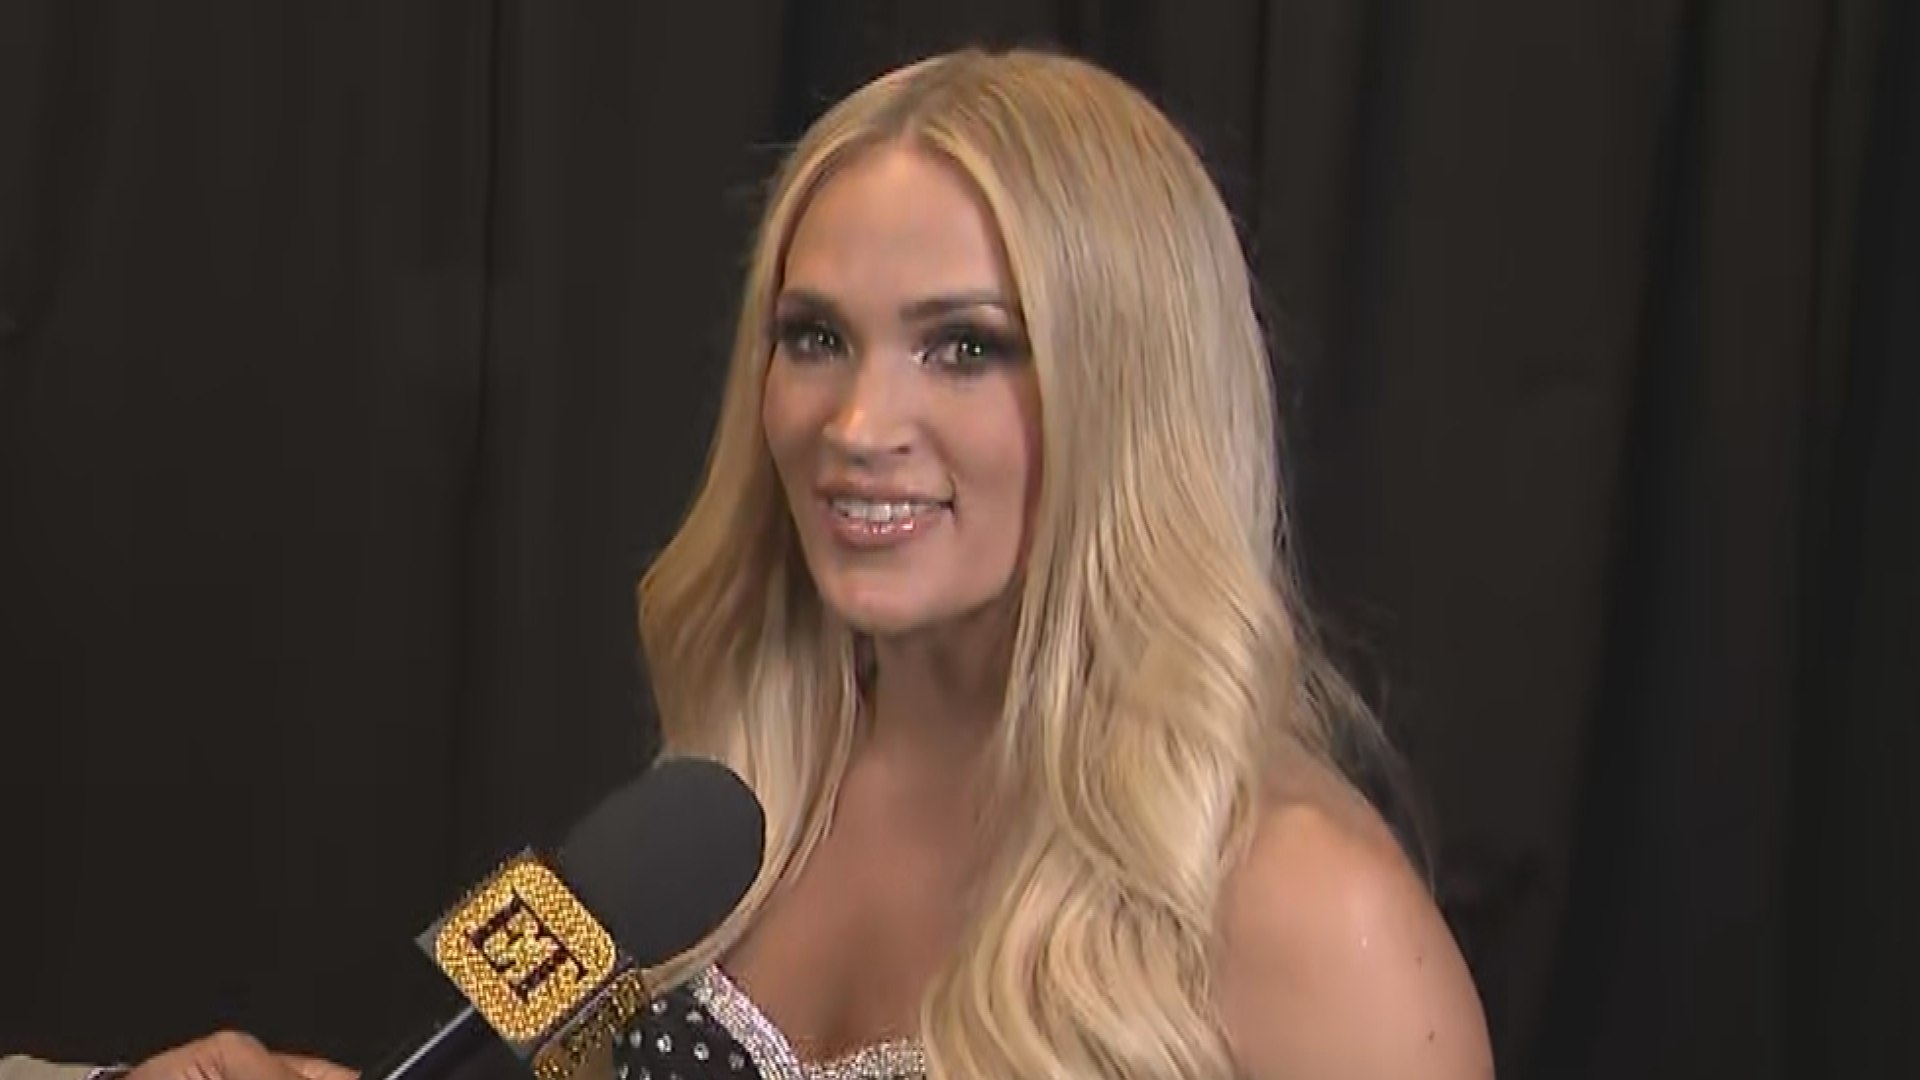 Carrie Underwood Reveals Her Sweet Dog Ace Died on Grammys Night